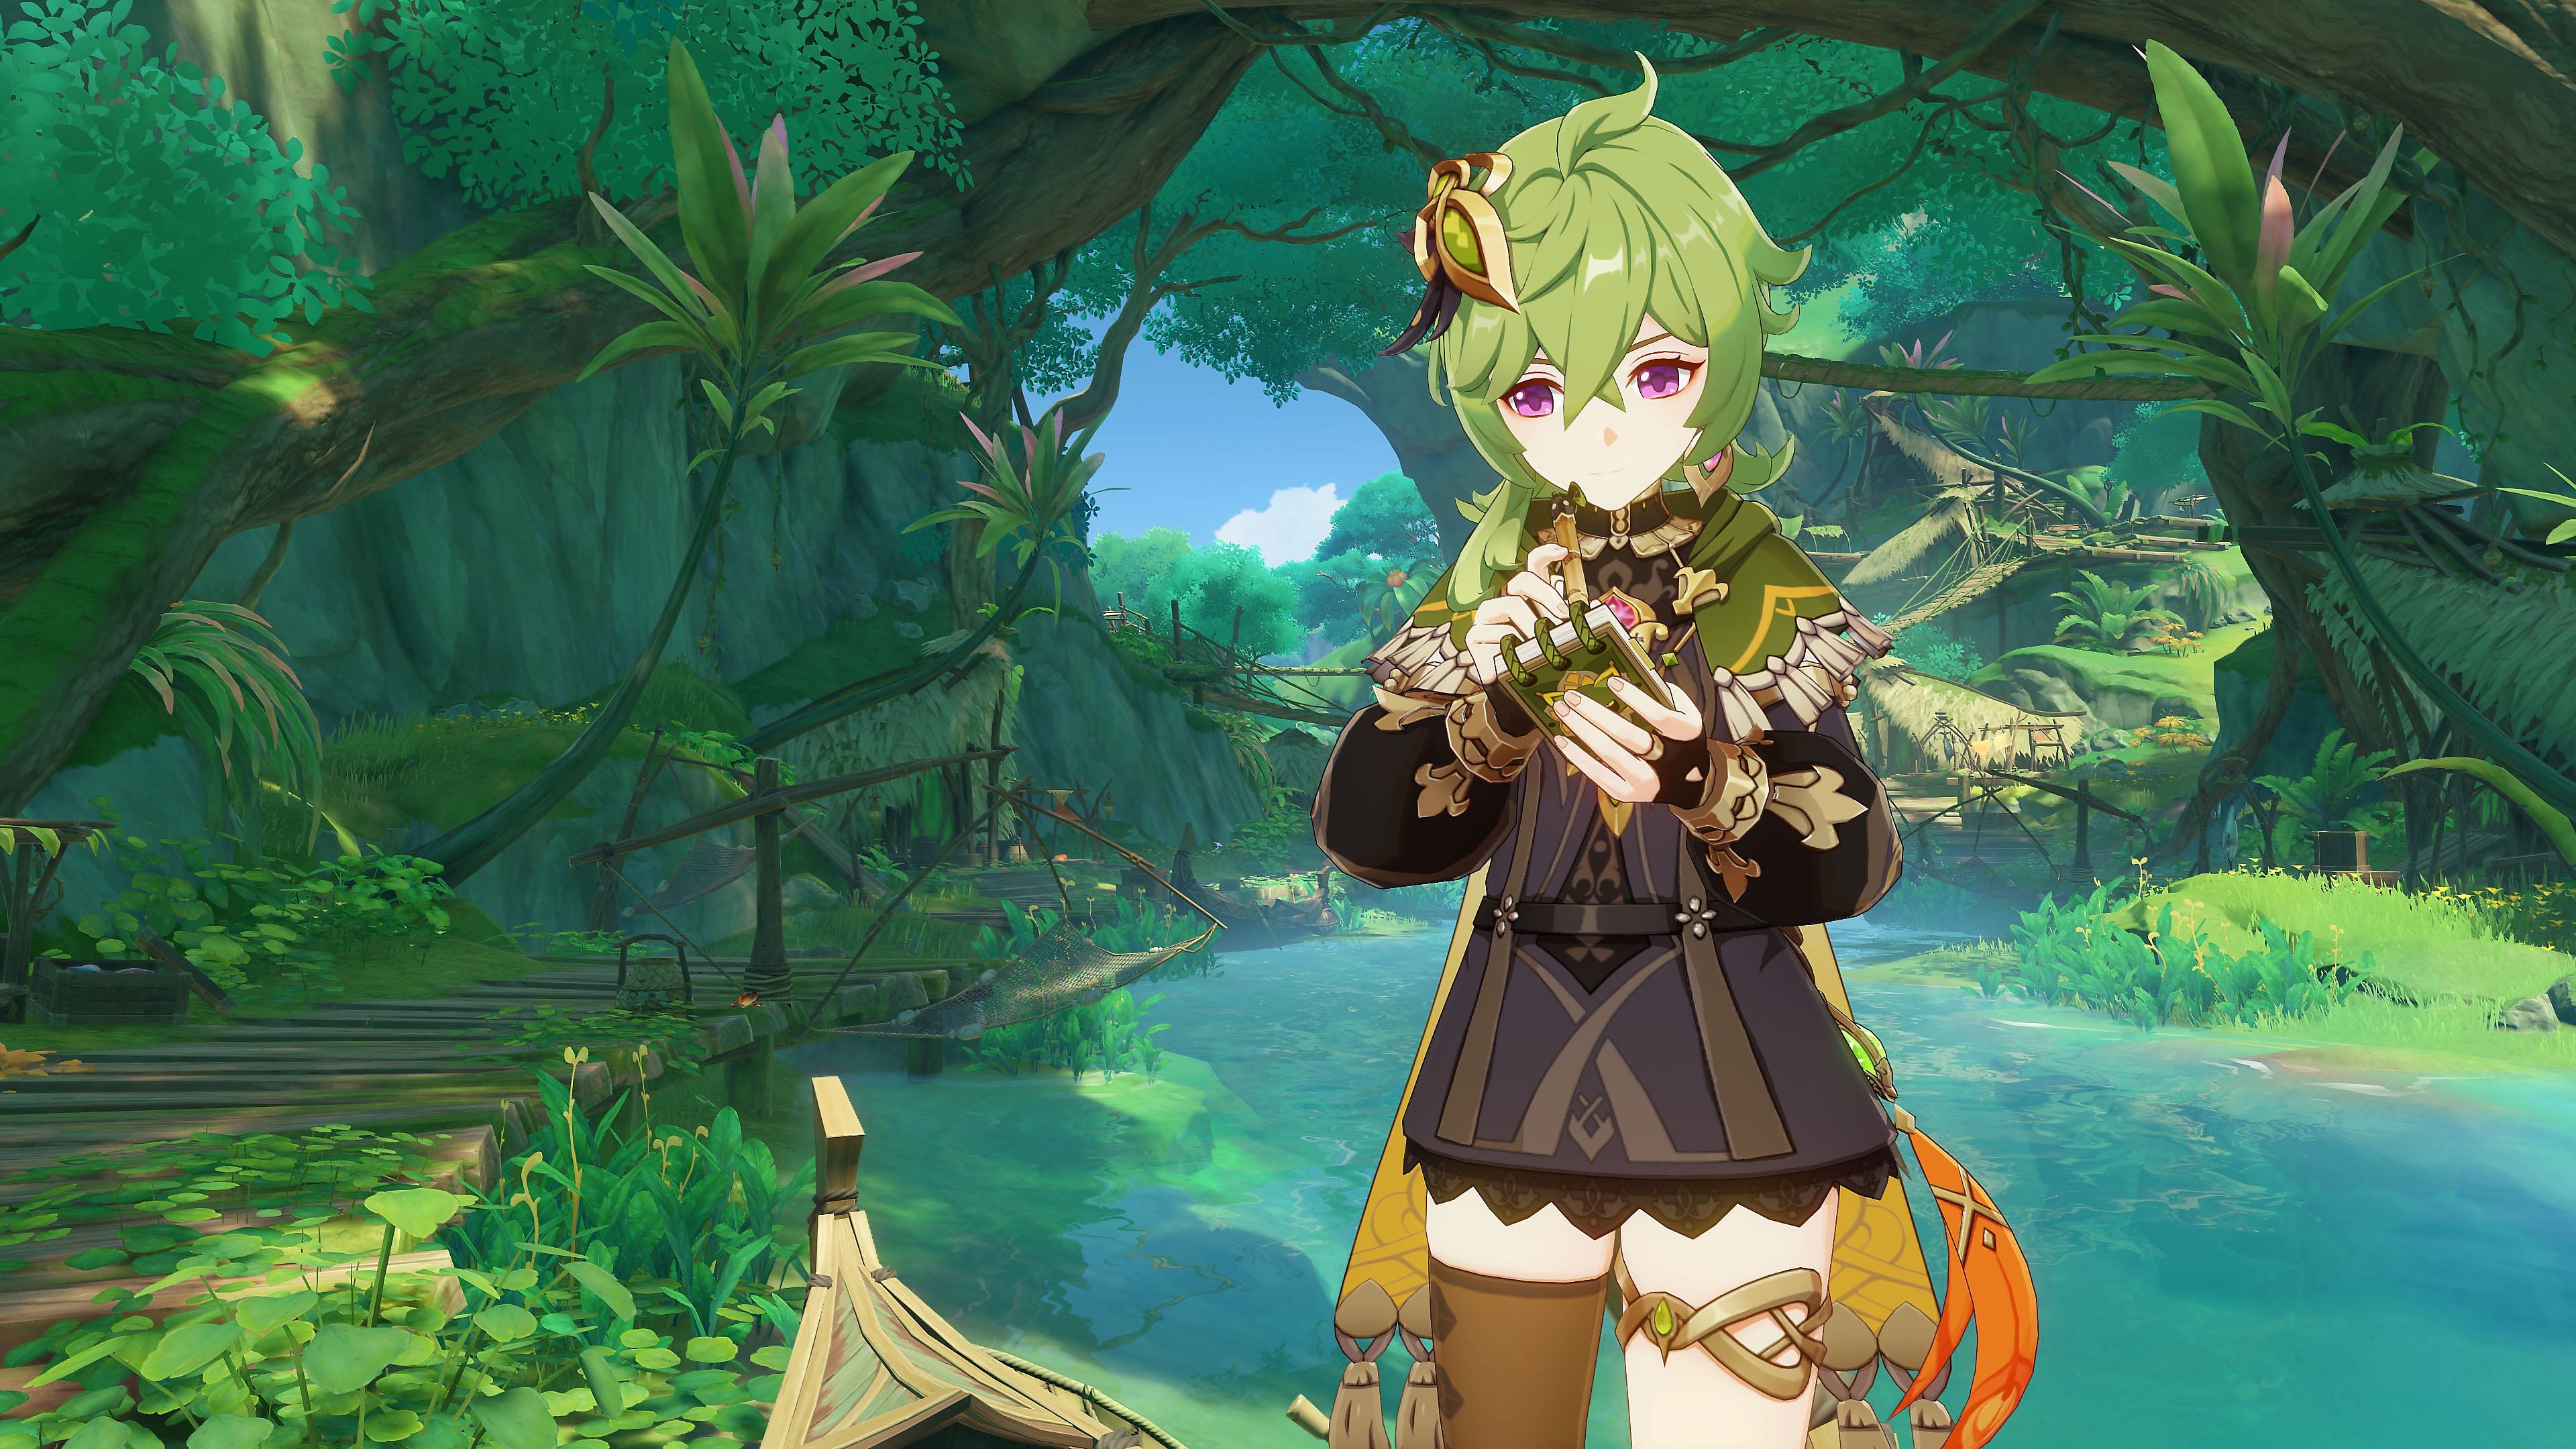 Genshin Impact: 3.0 Update screenshot showing a character with green hair in a rainforest scene